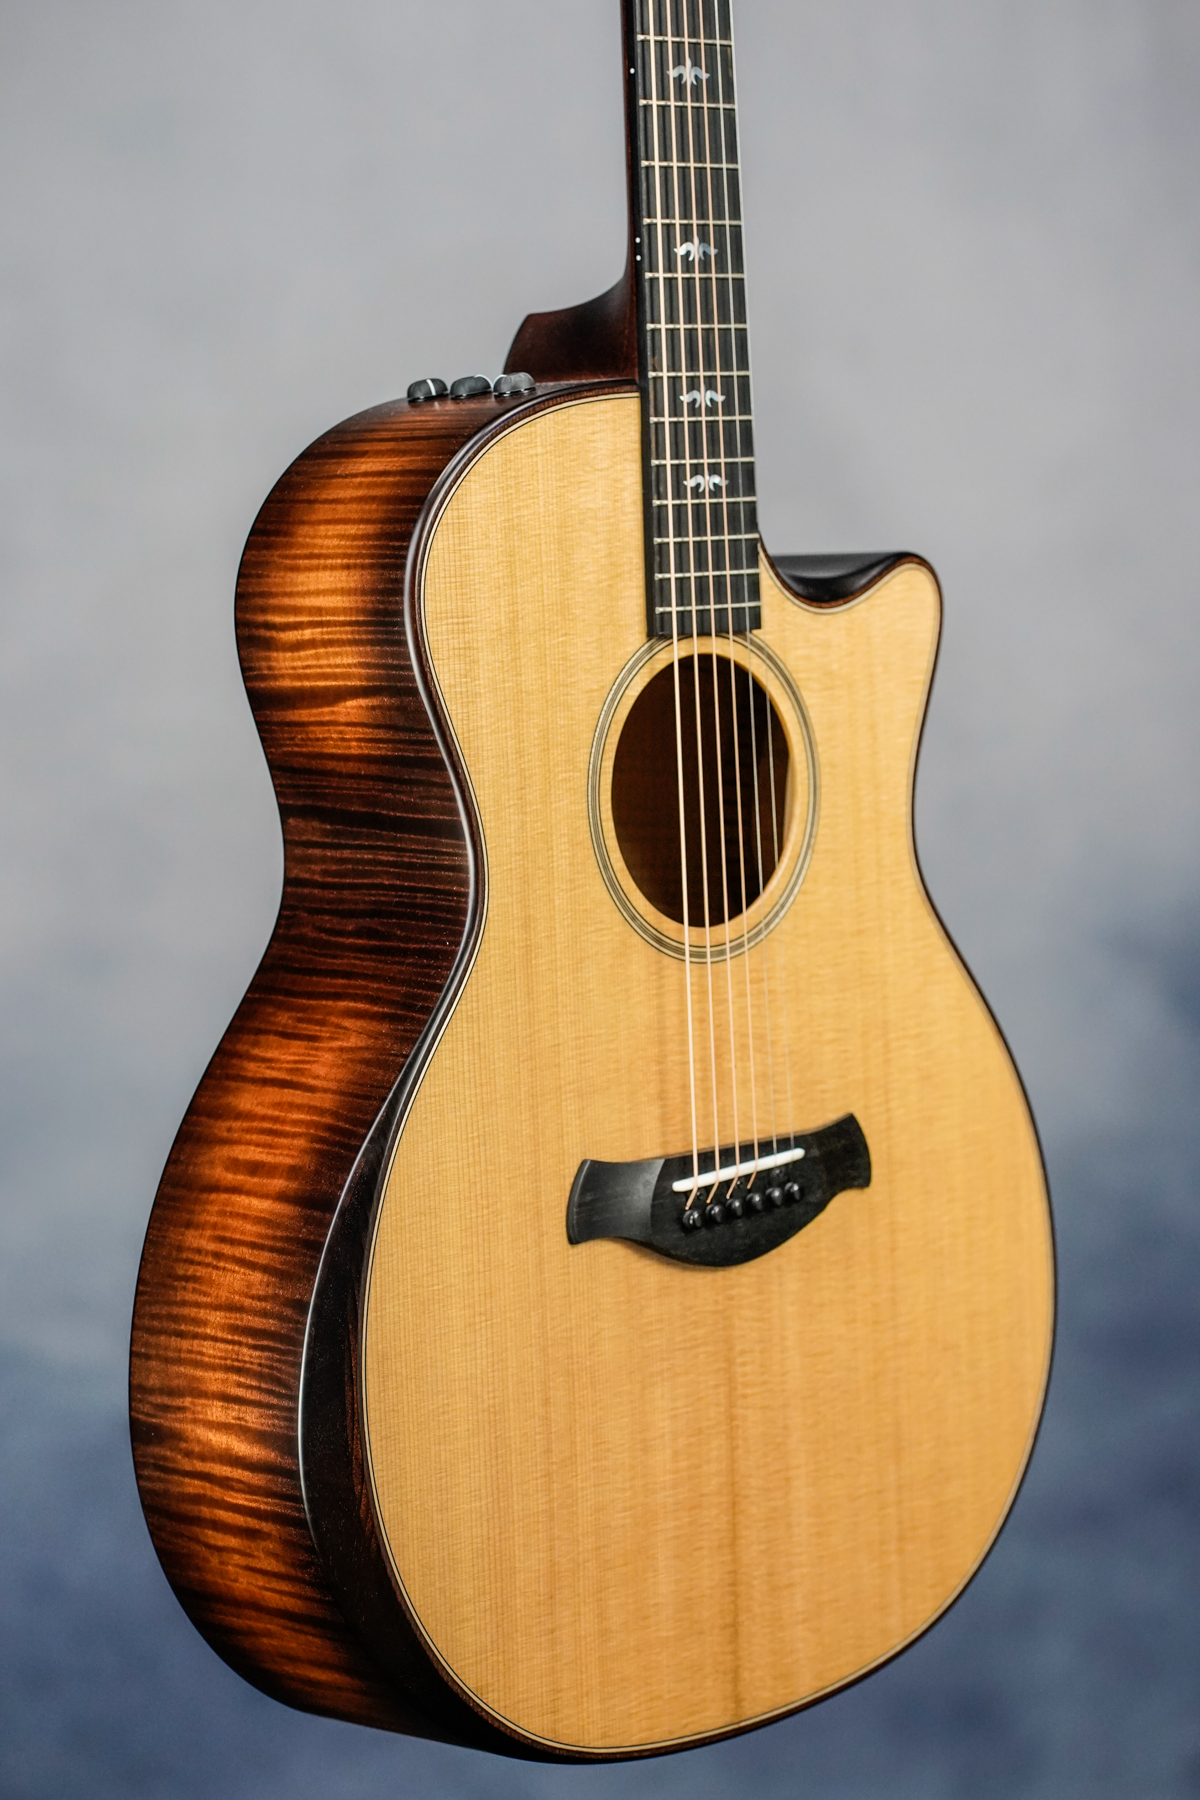 614ce Builders Edition Acoustic Guitar, Natural Top